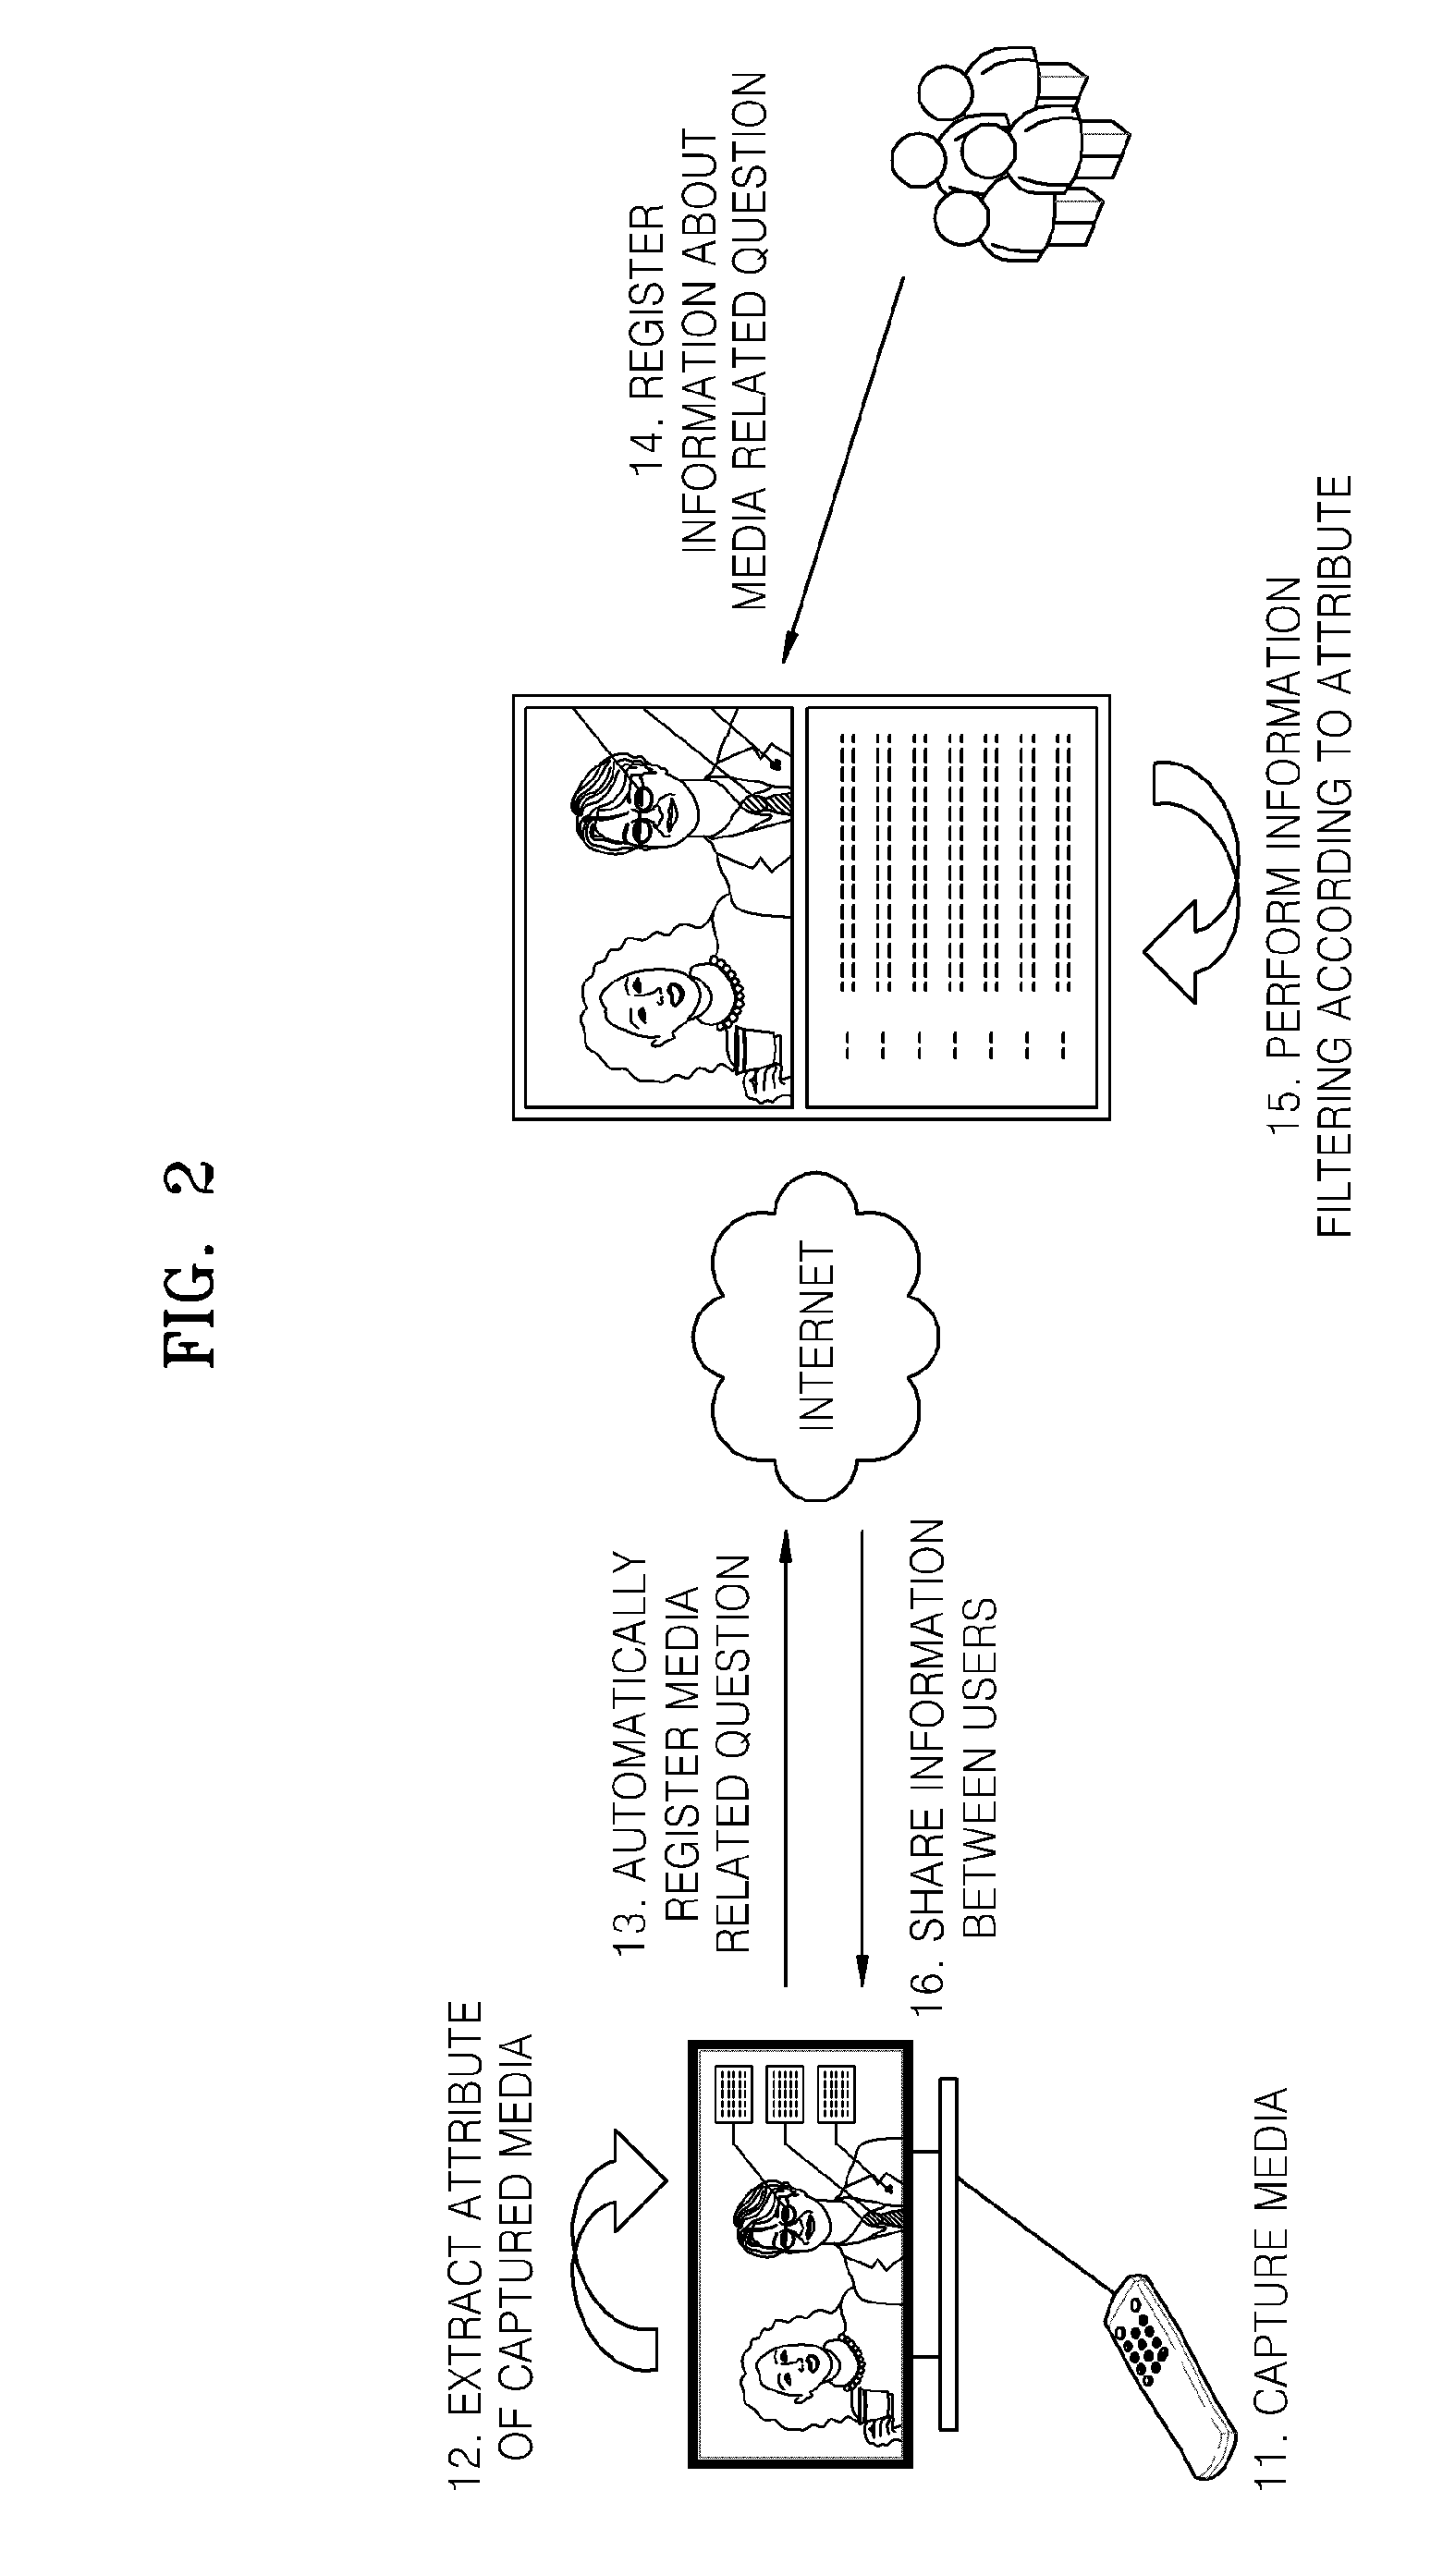 Method and system for sharing information between users in media reproducing system